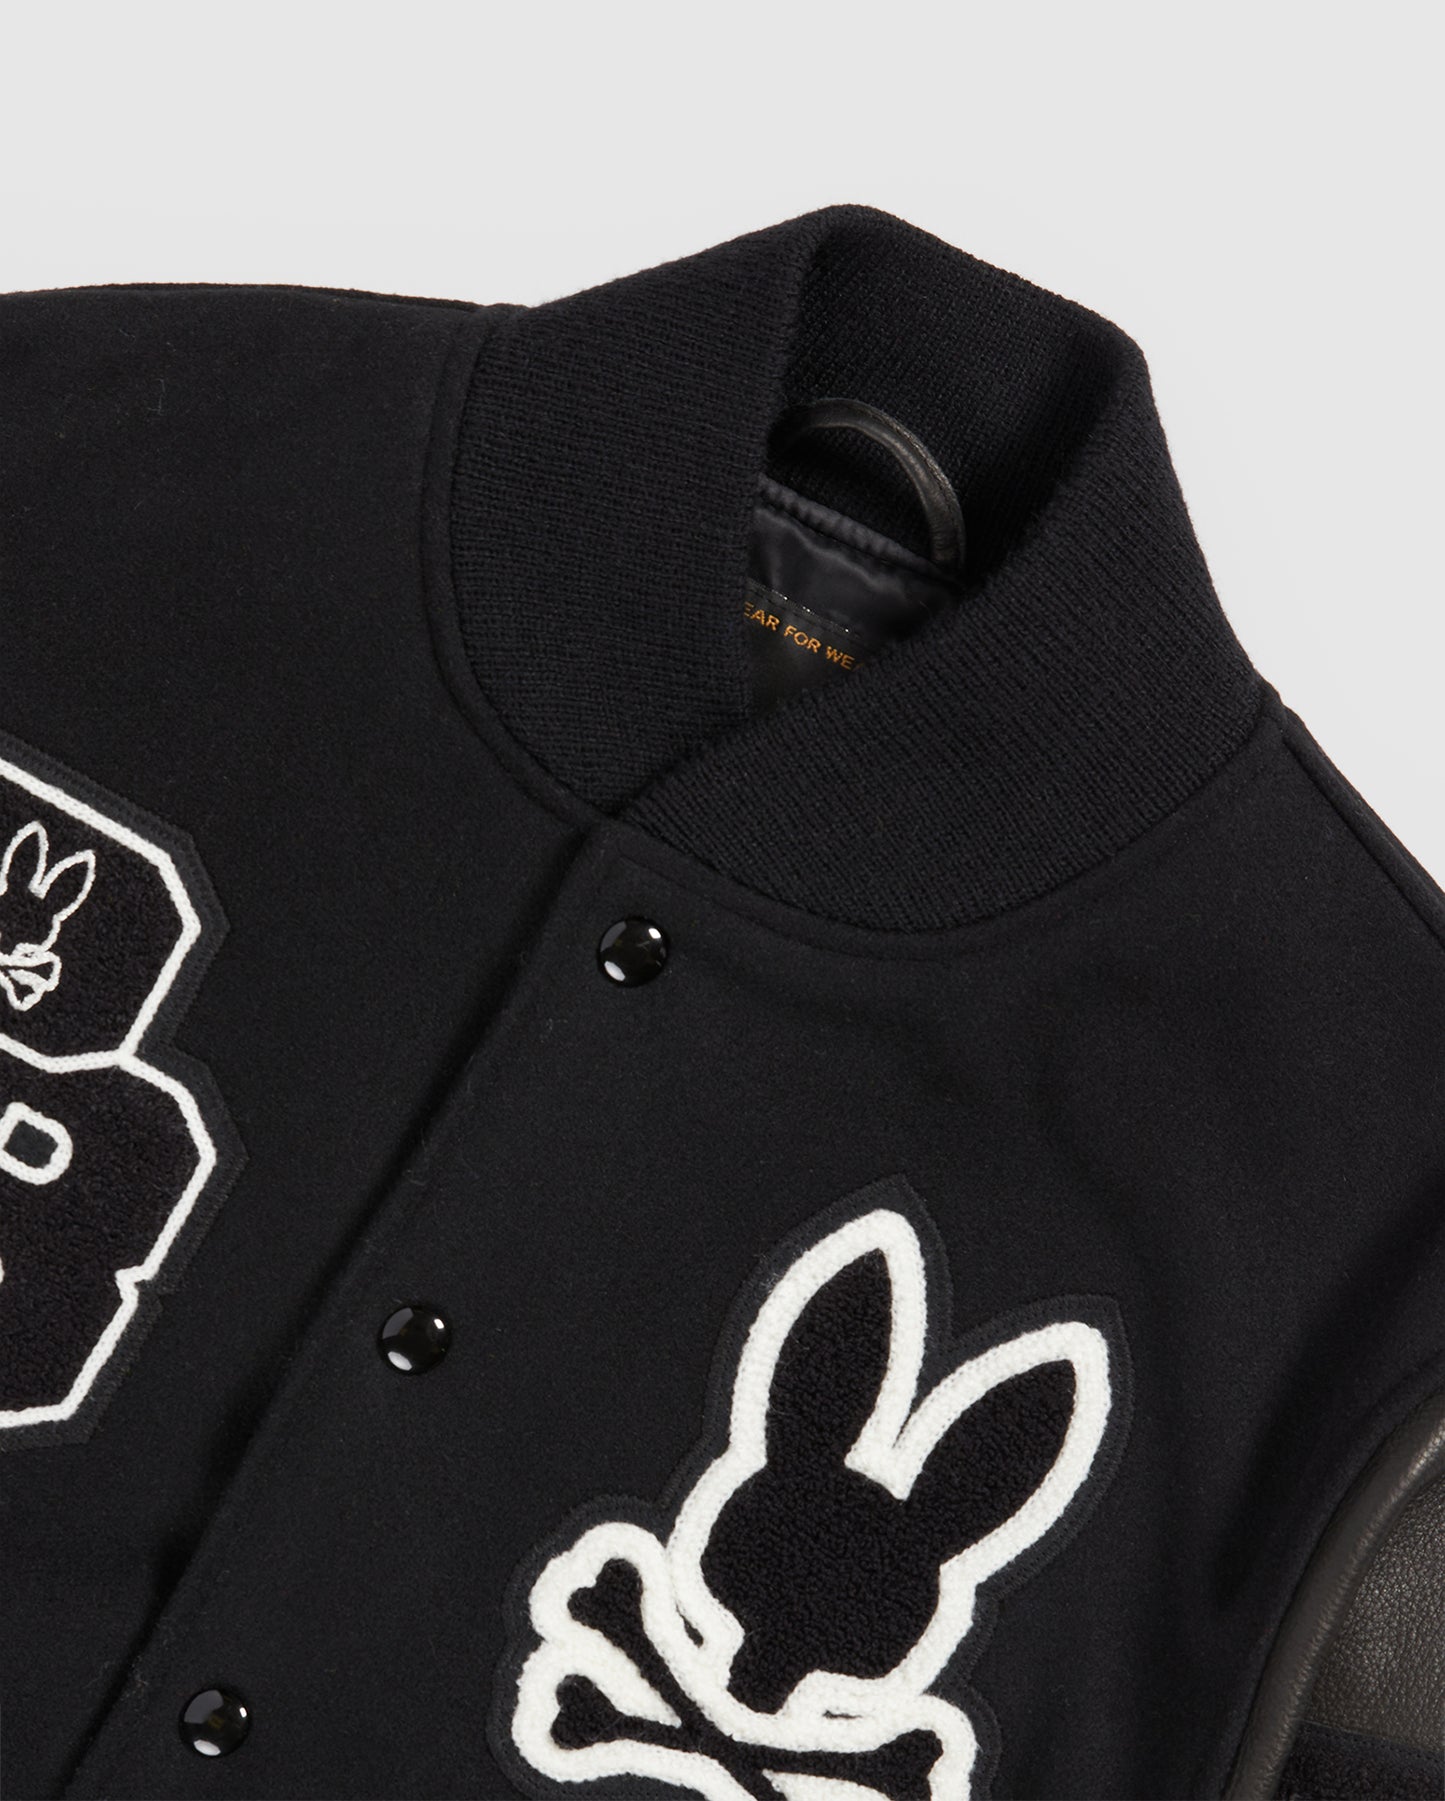 Psycho Bunny Jackets Discount Offers - Mens Pb X Golden Bear Varsity  Leather Embroidered Jacket 410 Navy